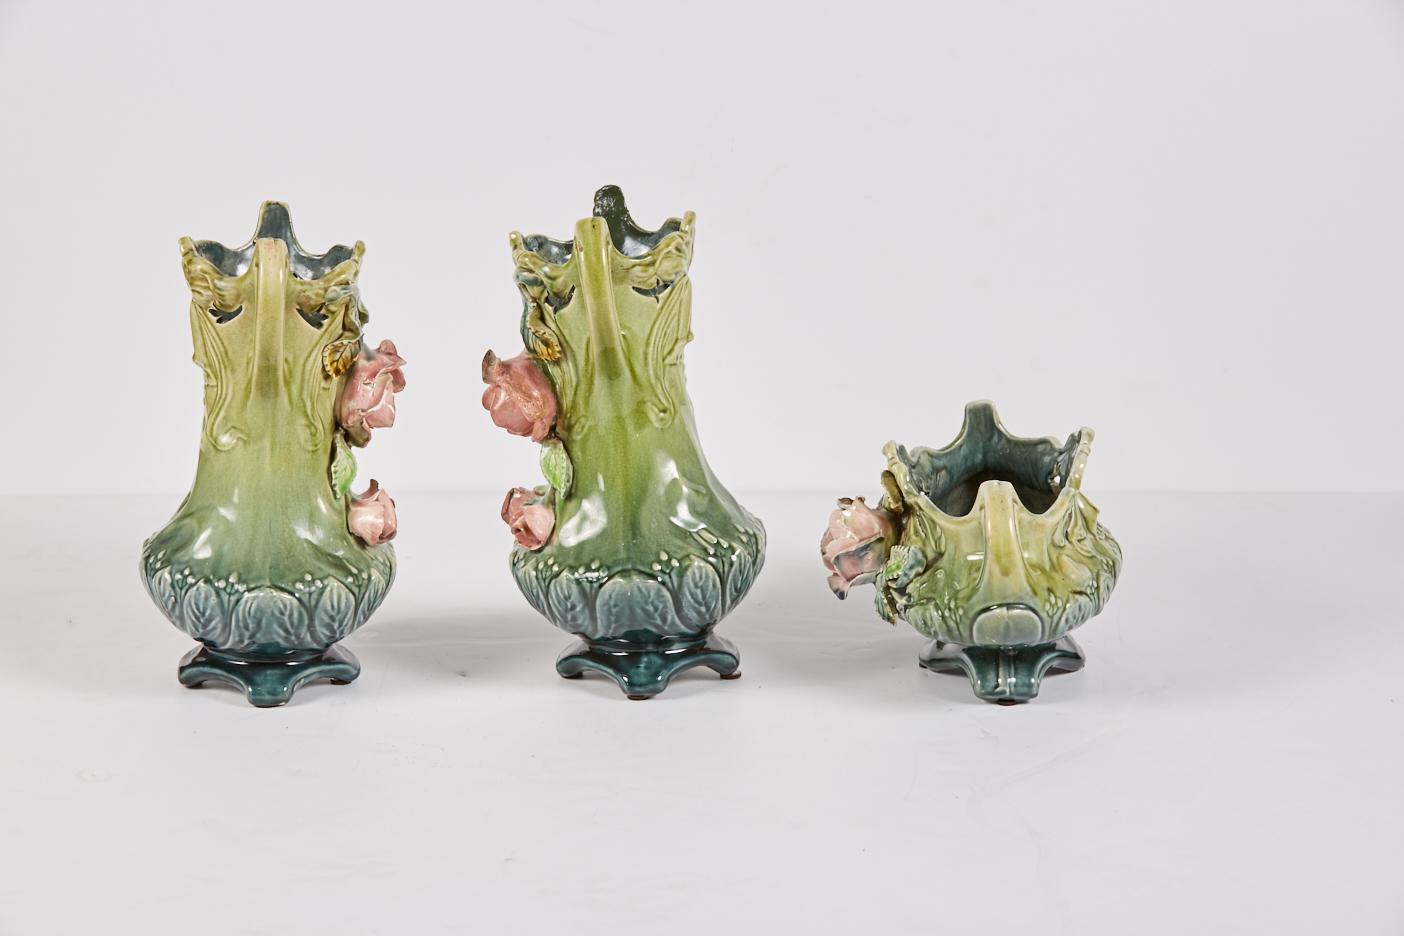 Antique French Barbotine garniture consisting of a pair of vases and a jardinière, each with applied roses. Vases measure 11.5